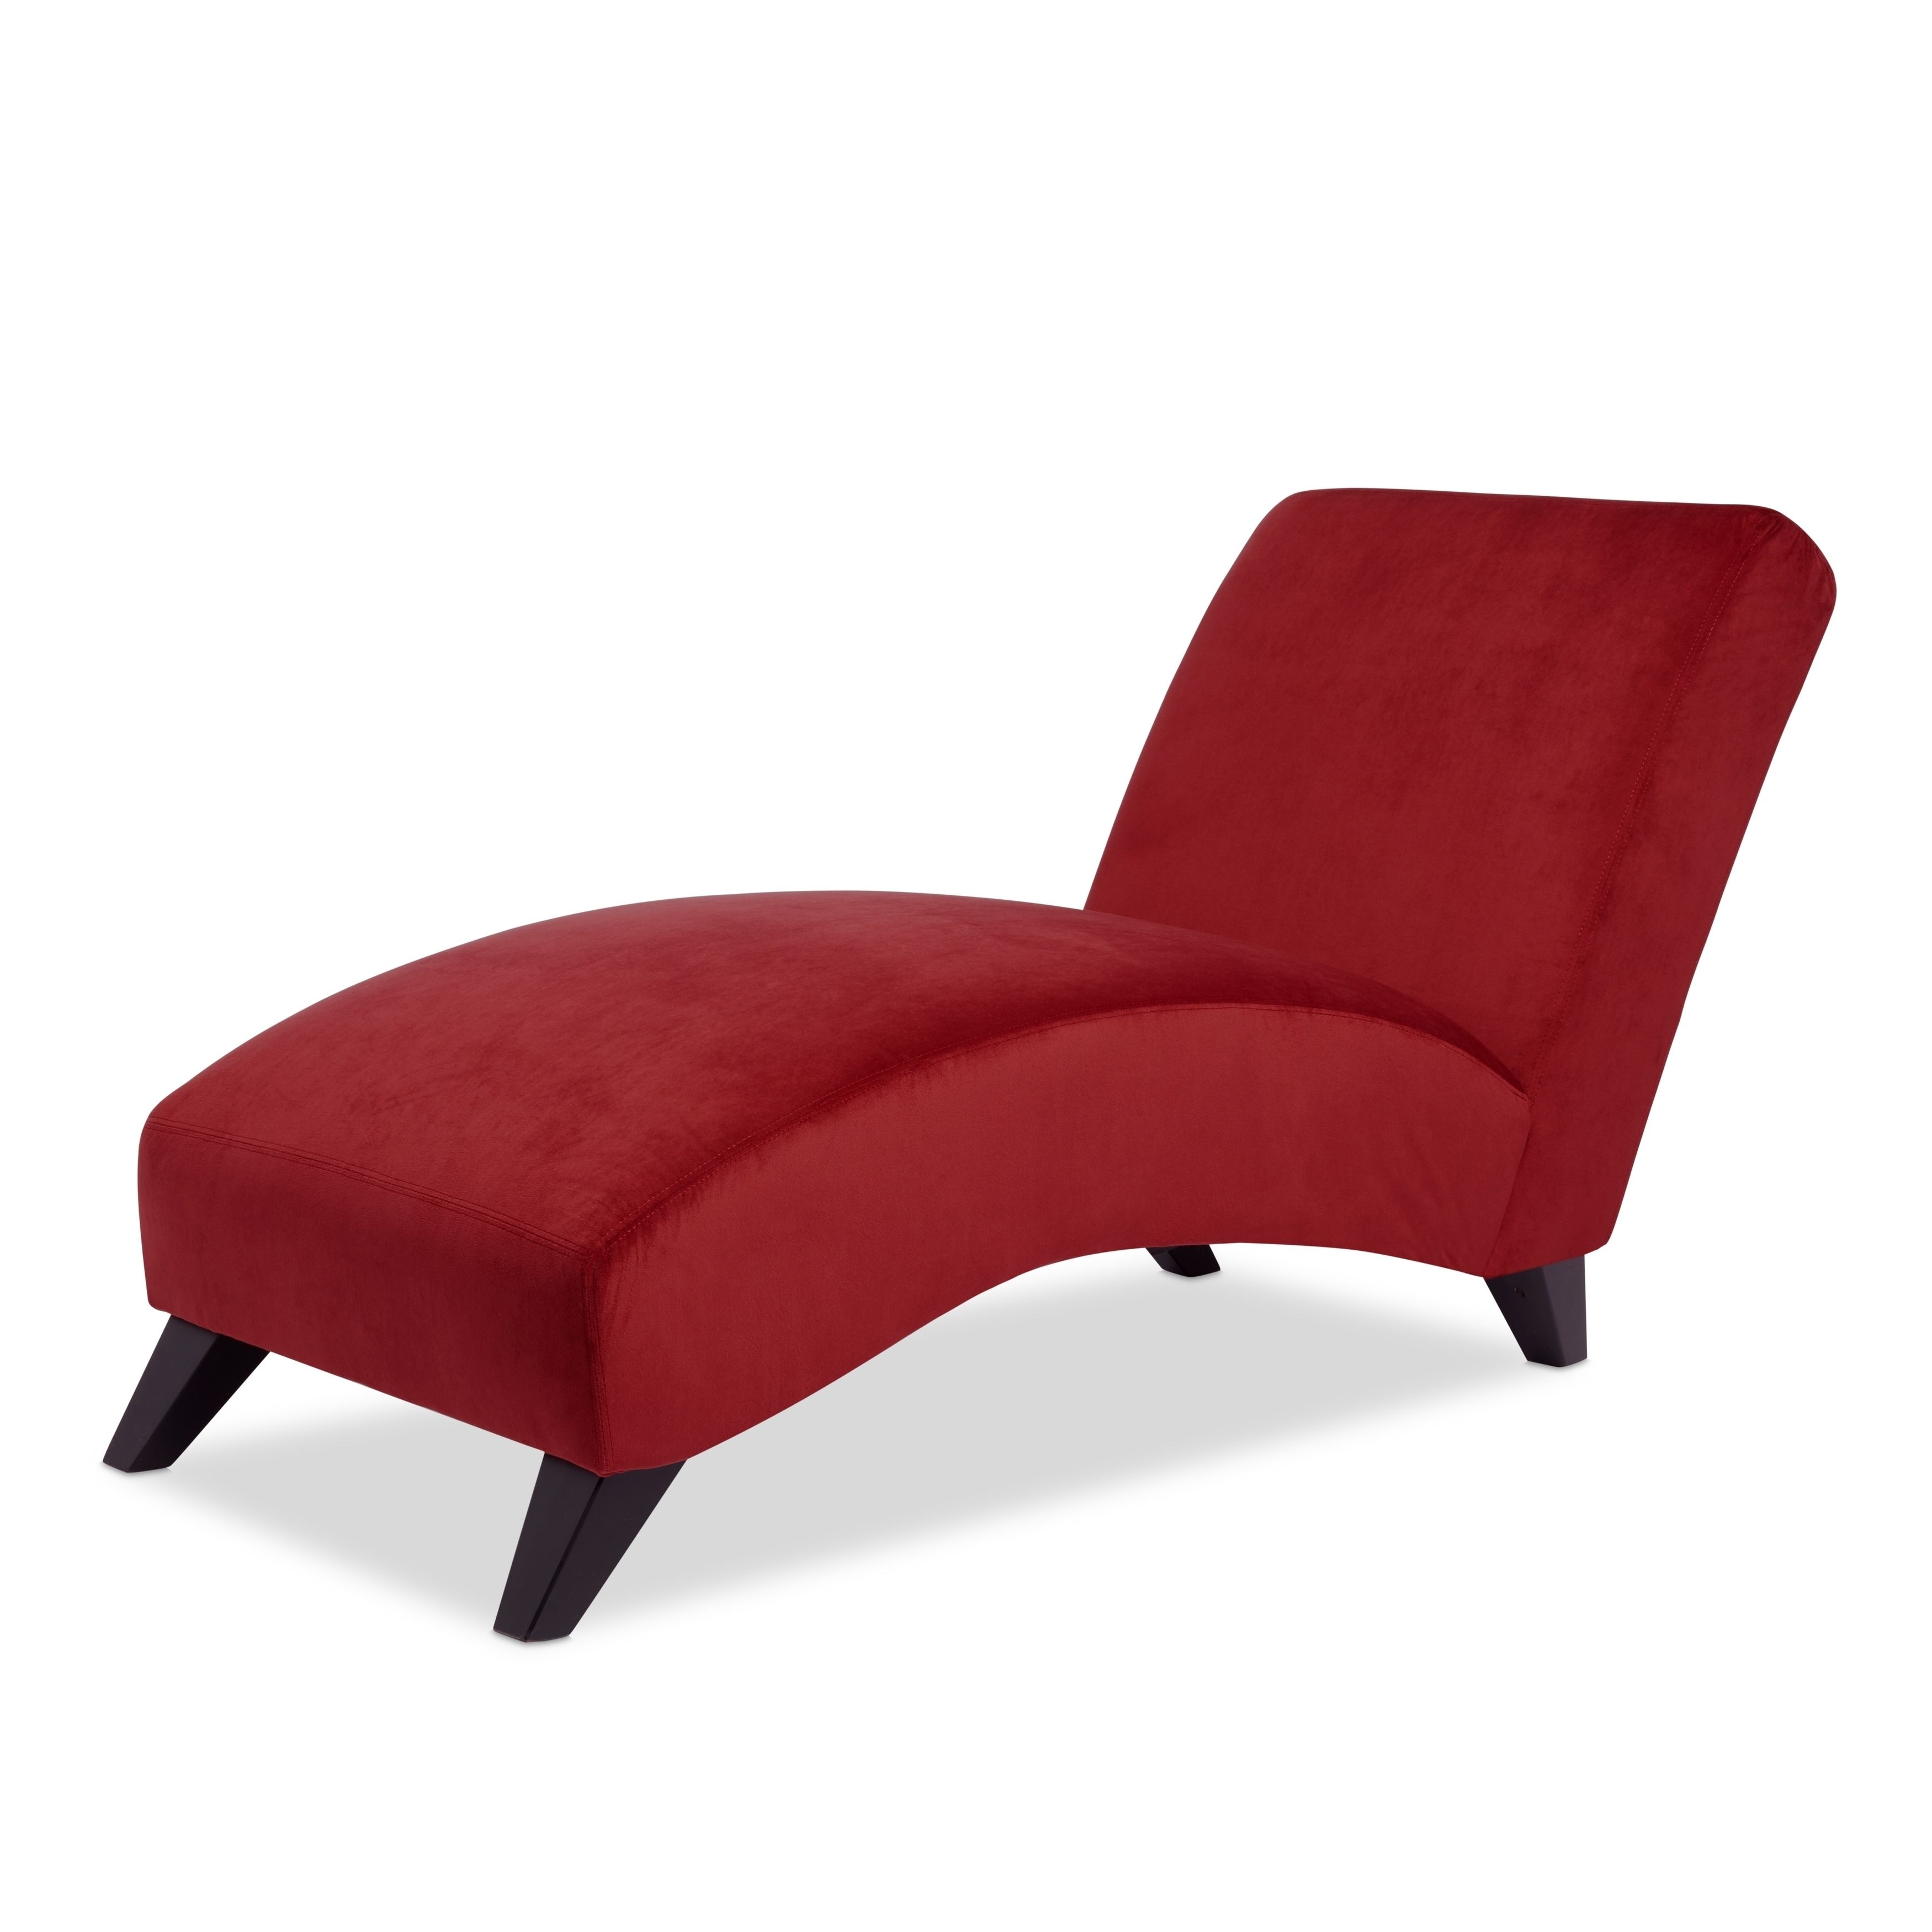 Famous Overstock Chaises In Bella Chaise Lounge Berry – Free Shipping Today – Overstock (View 12 of 15)